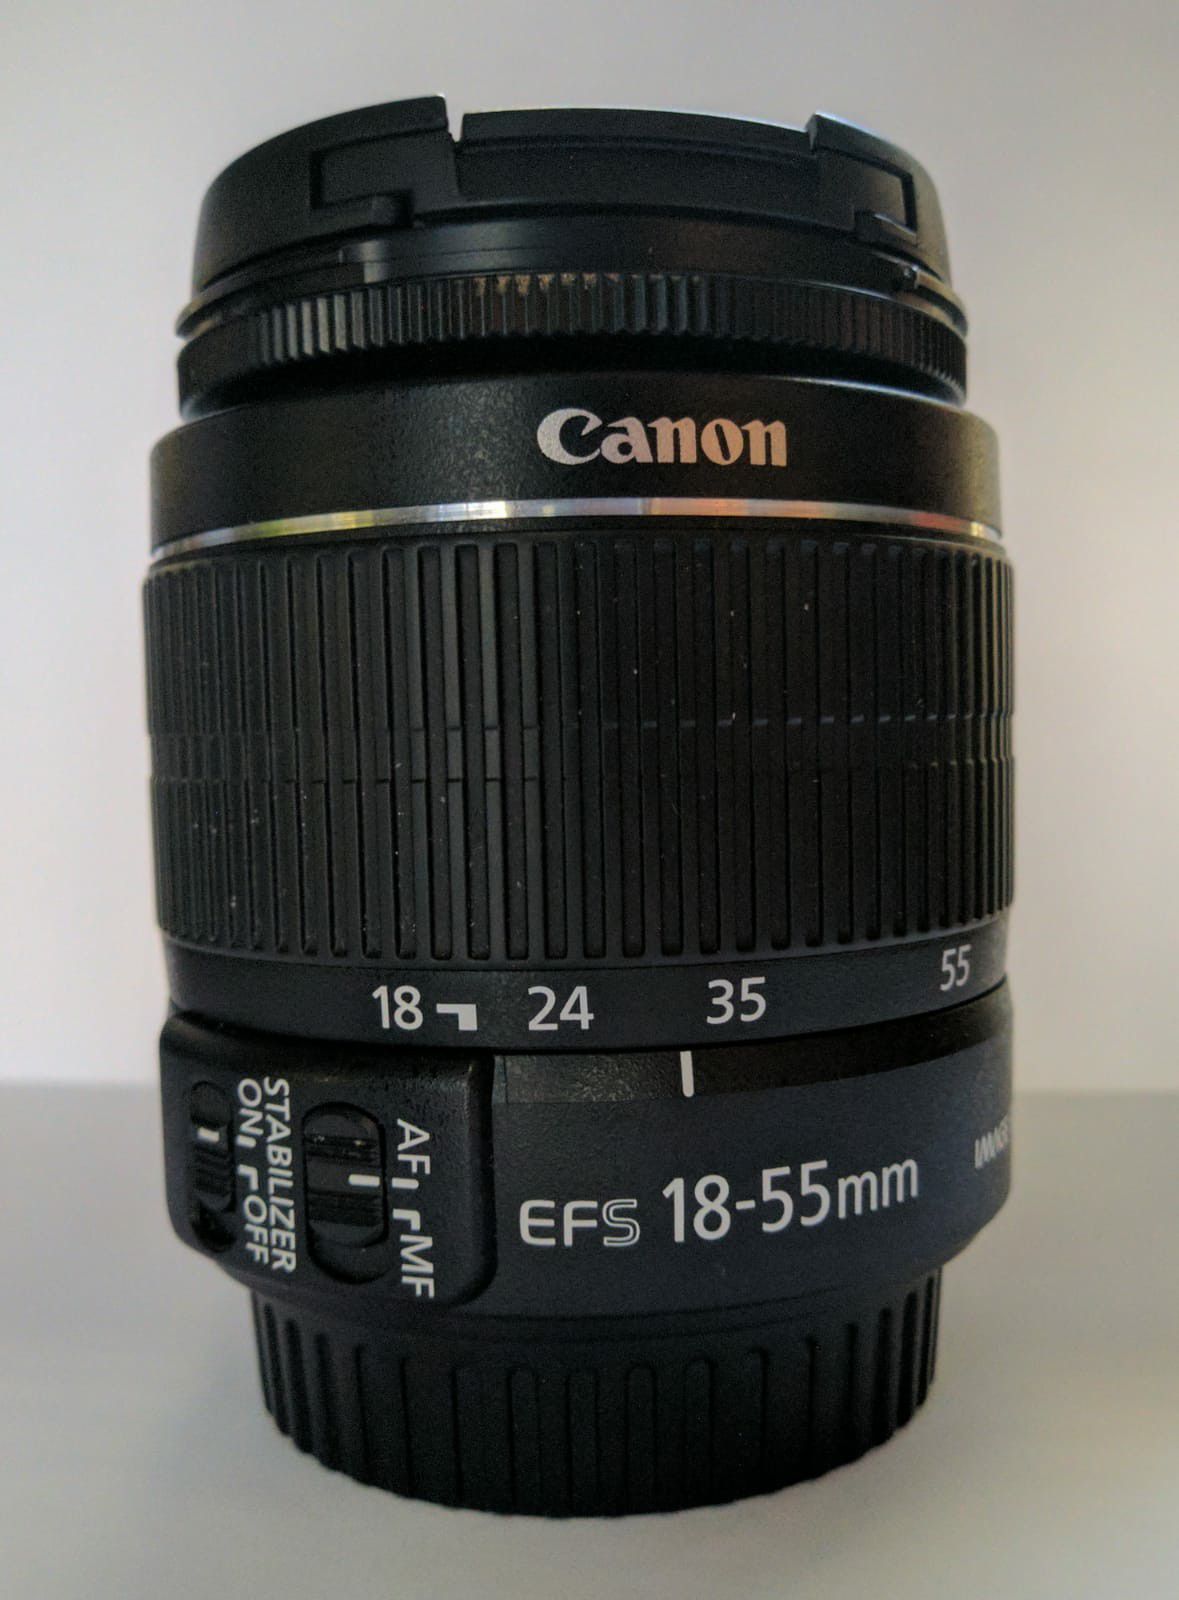 Canon ef-s 18-55mm f/3.5-5.6 lens